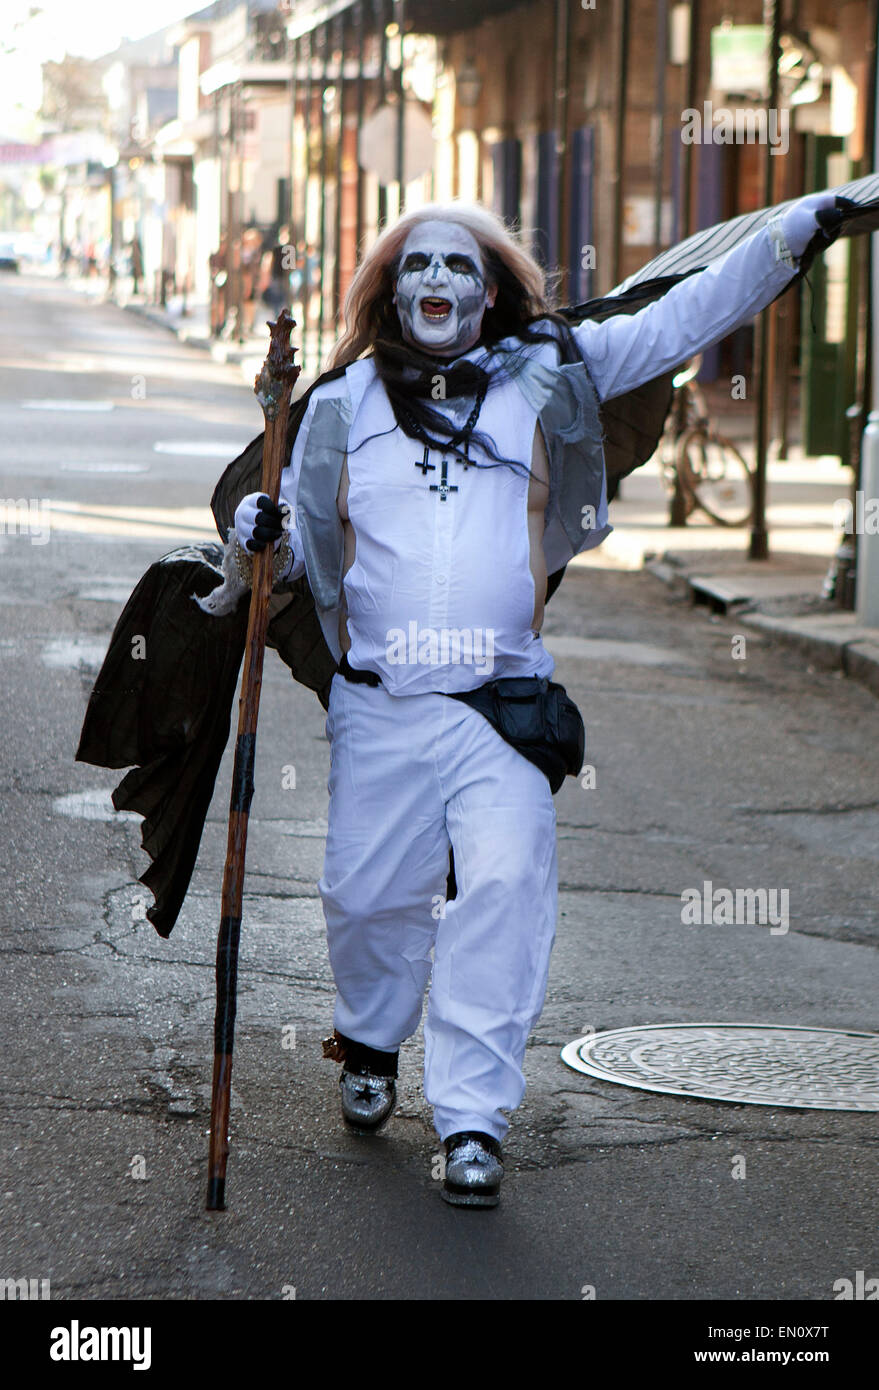 Voodoo man High Resolution Stock Photography and Images - Alamy